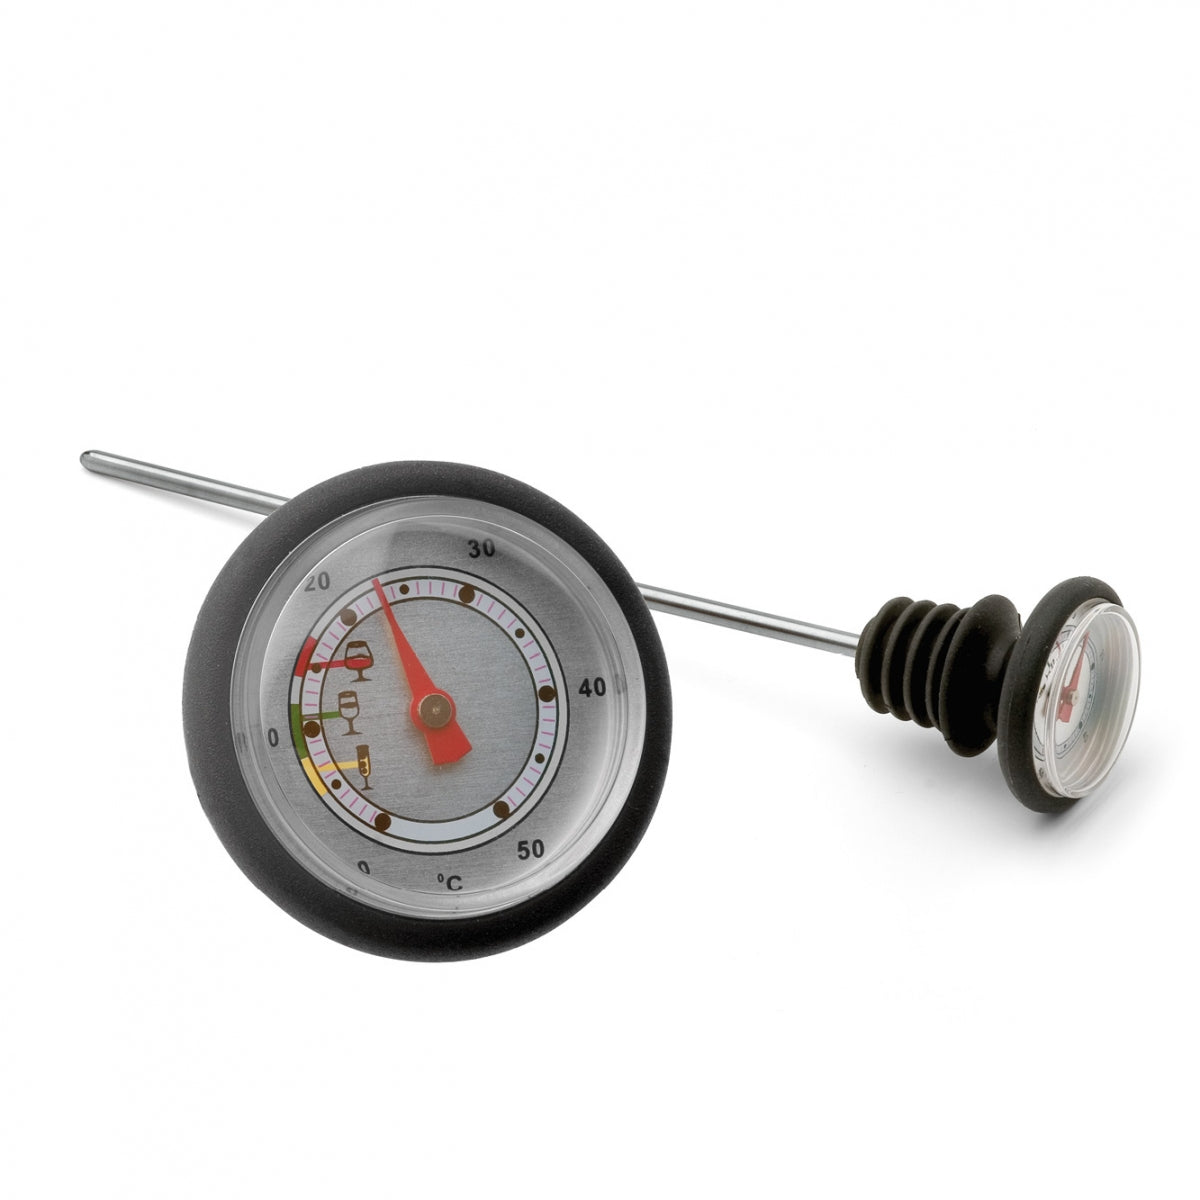 Weis wine thermometer